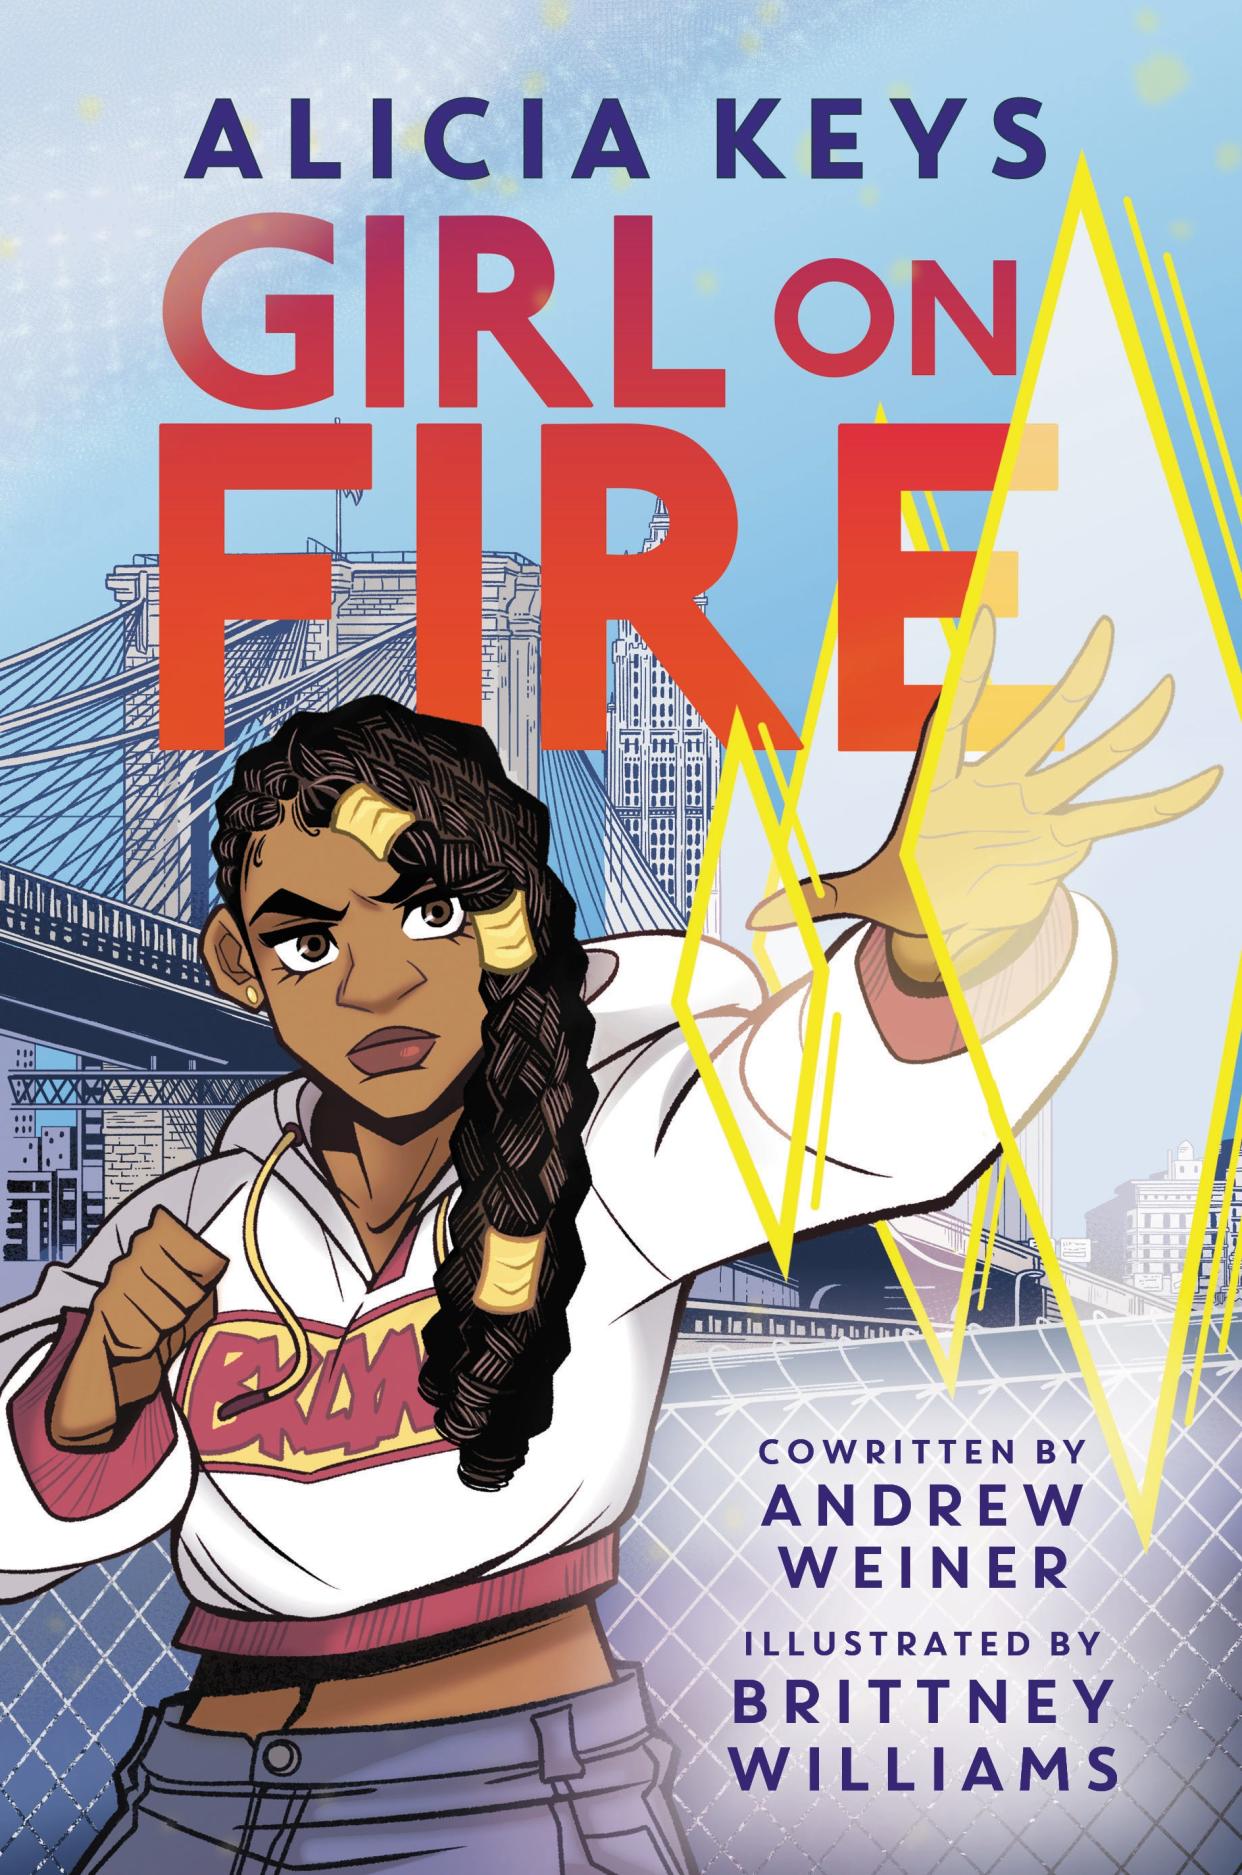 Alicia Keys' new graphic novel, "Girl on Fire," co-written by Andrew Weiner and illustrated by Brittney Williams, is inspired by the song.